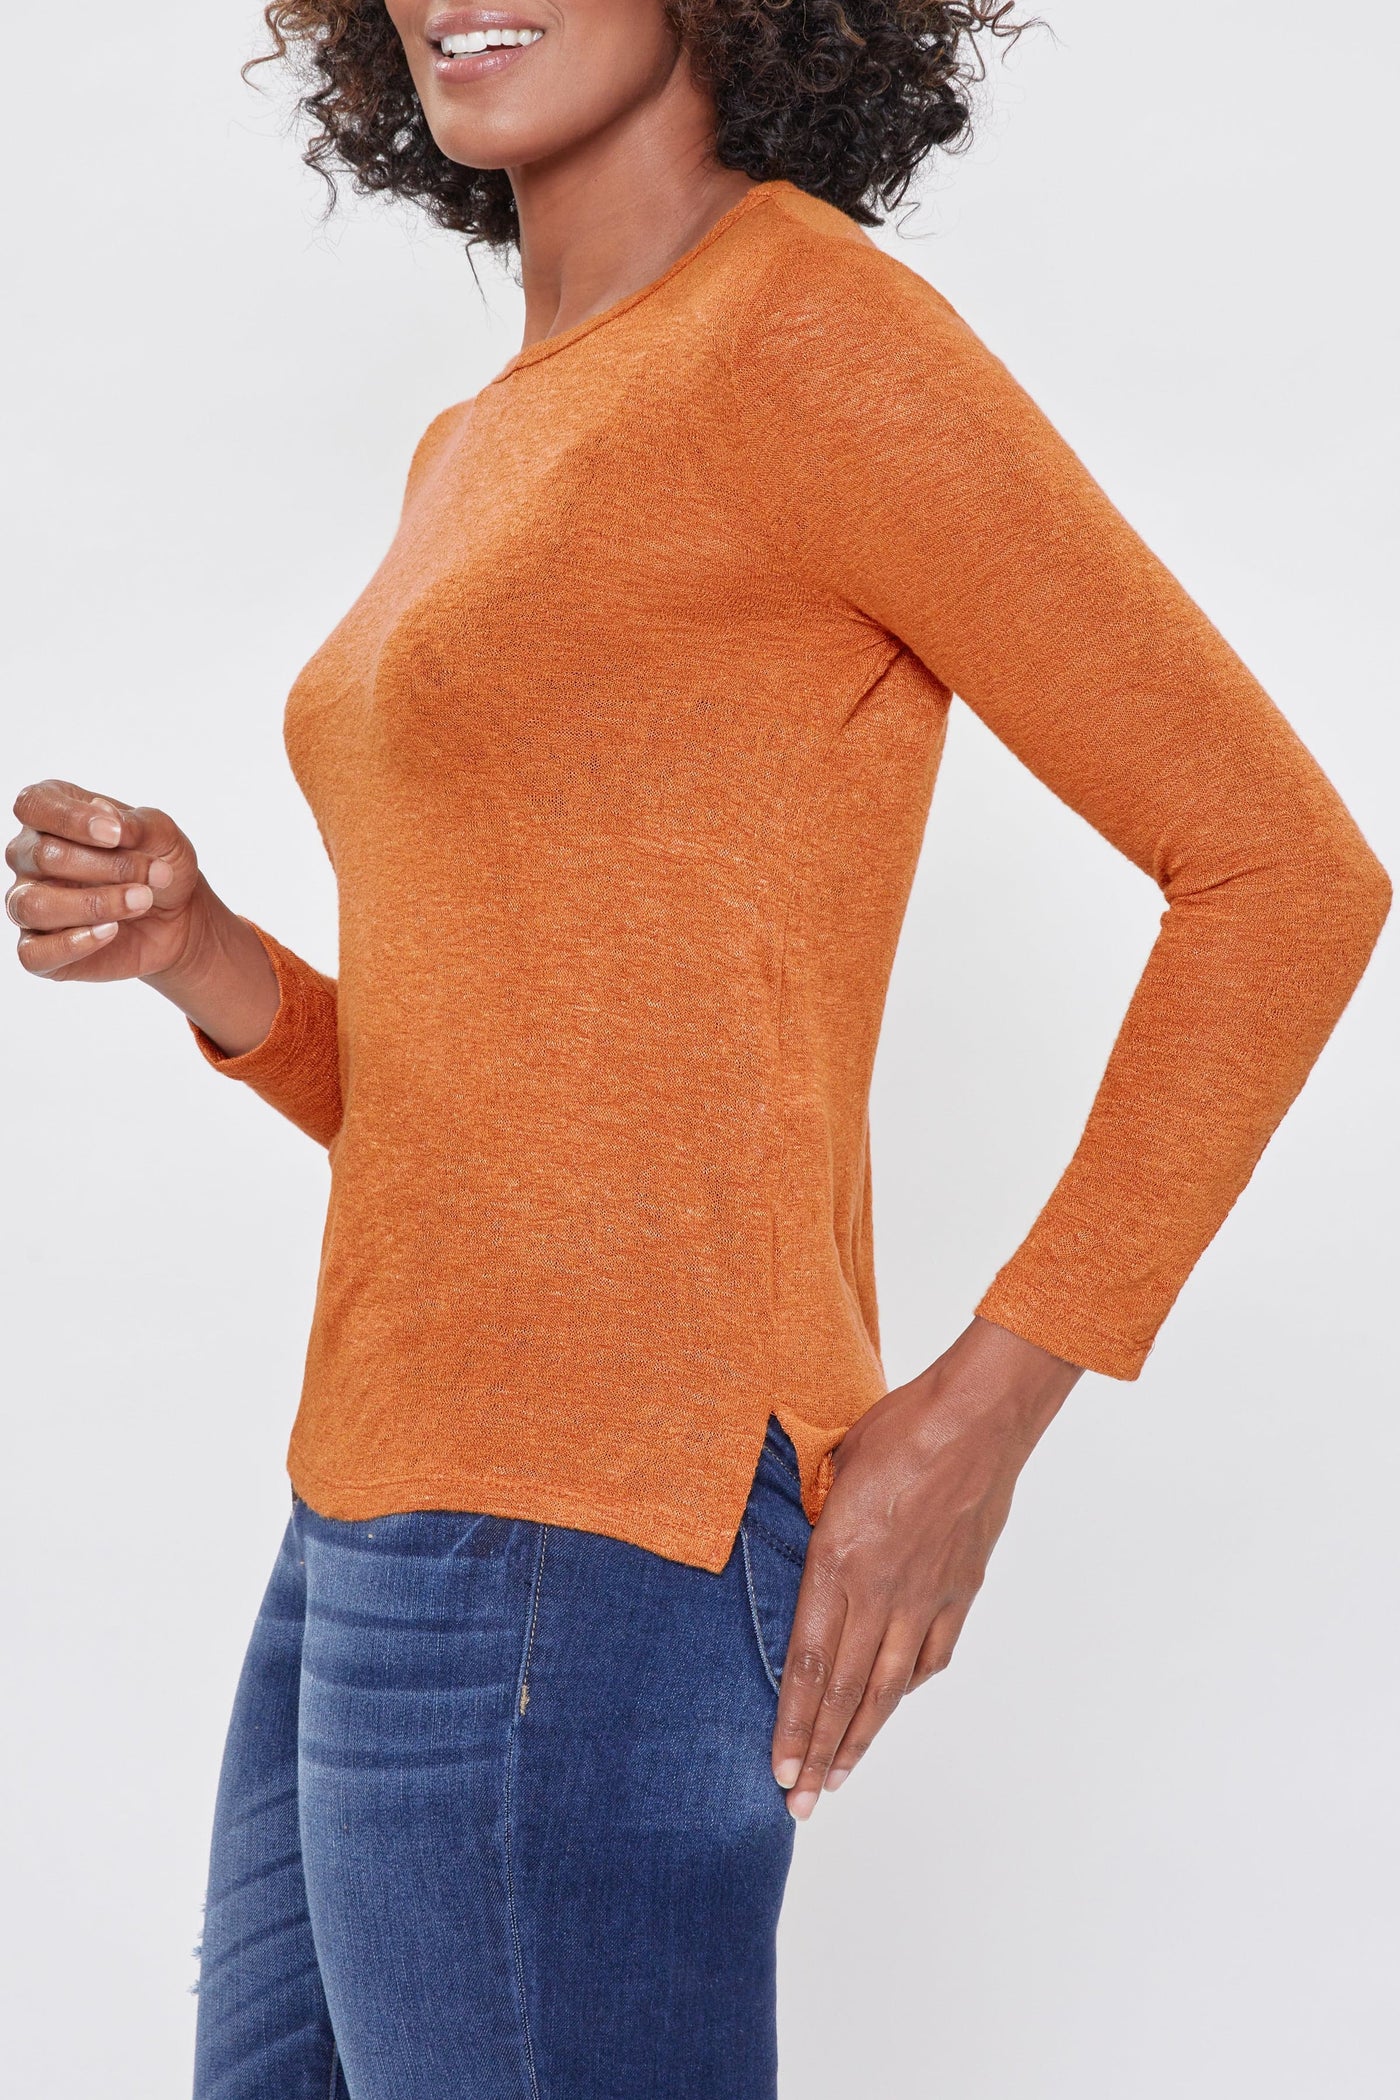 Women's Textured And Cozy Long Sleeve Tee Deal